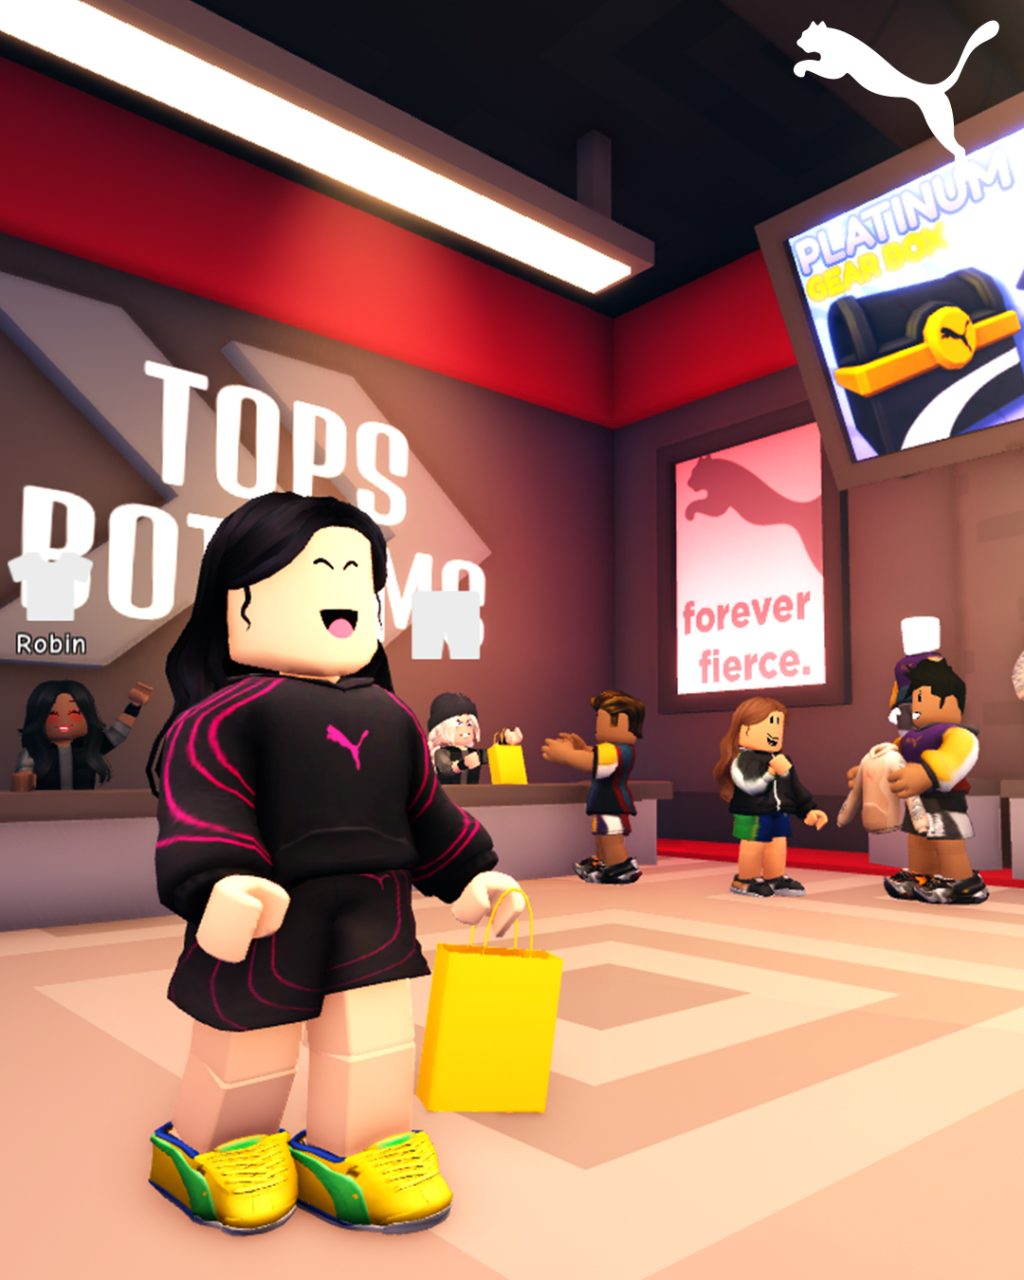 A new virtual world on Roblox for PUMA fans to meet and compete in sports